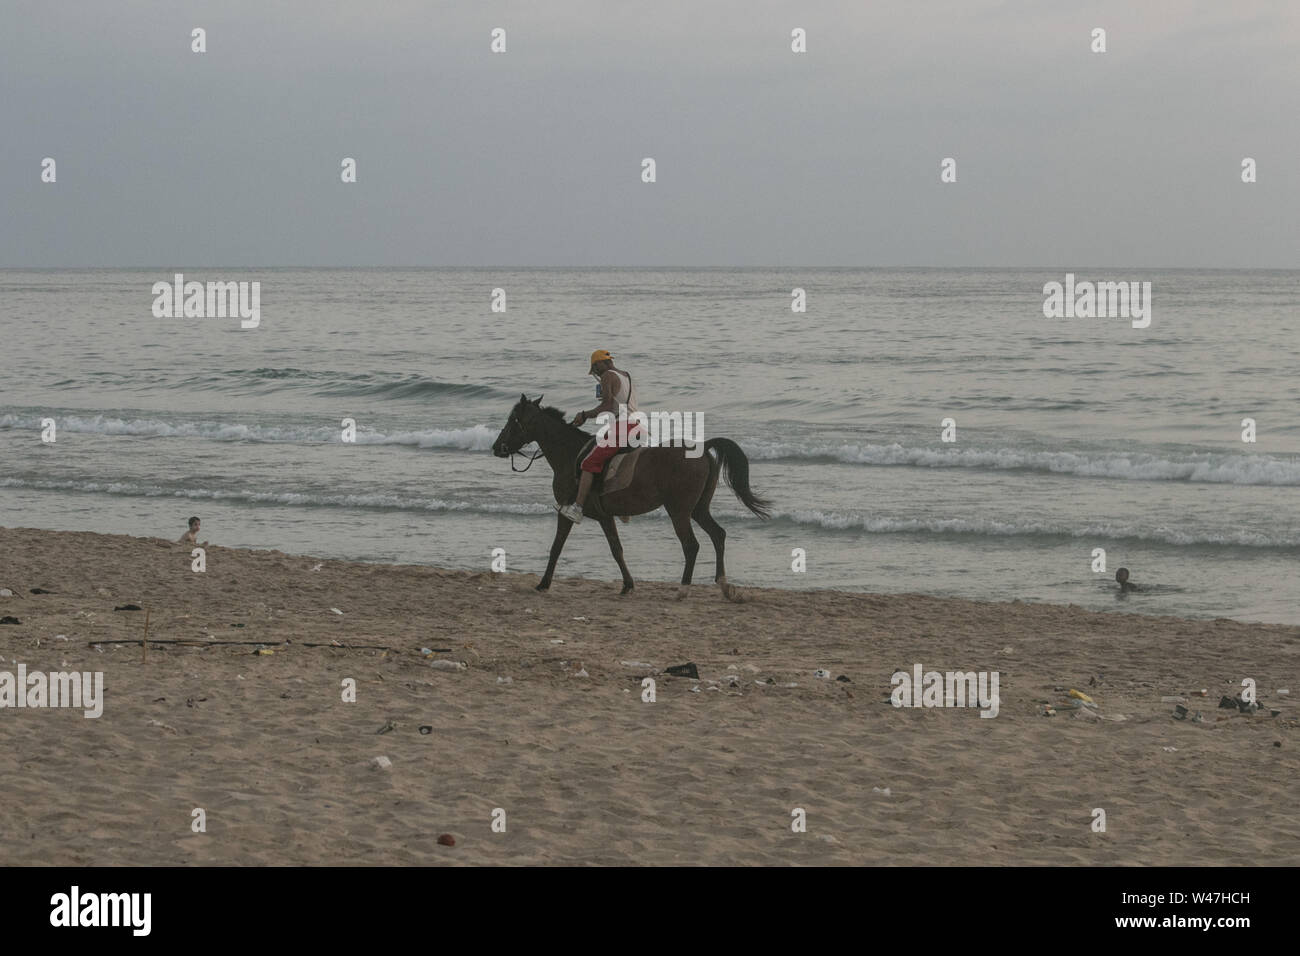 Beirut, Lebanon. 20th July, 2019. A man rides a horse at the beach as the sun sets in Beirut. Credit: Amer Ghazzal/SOPA Images/ZUMA Wire/Alamy Live News Stock Photo